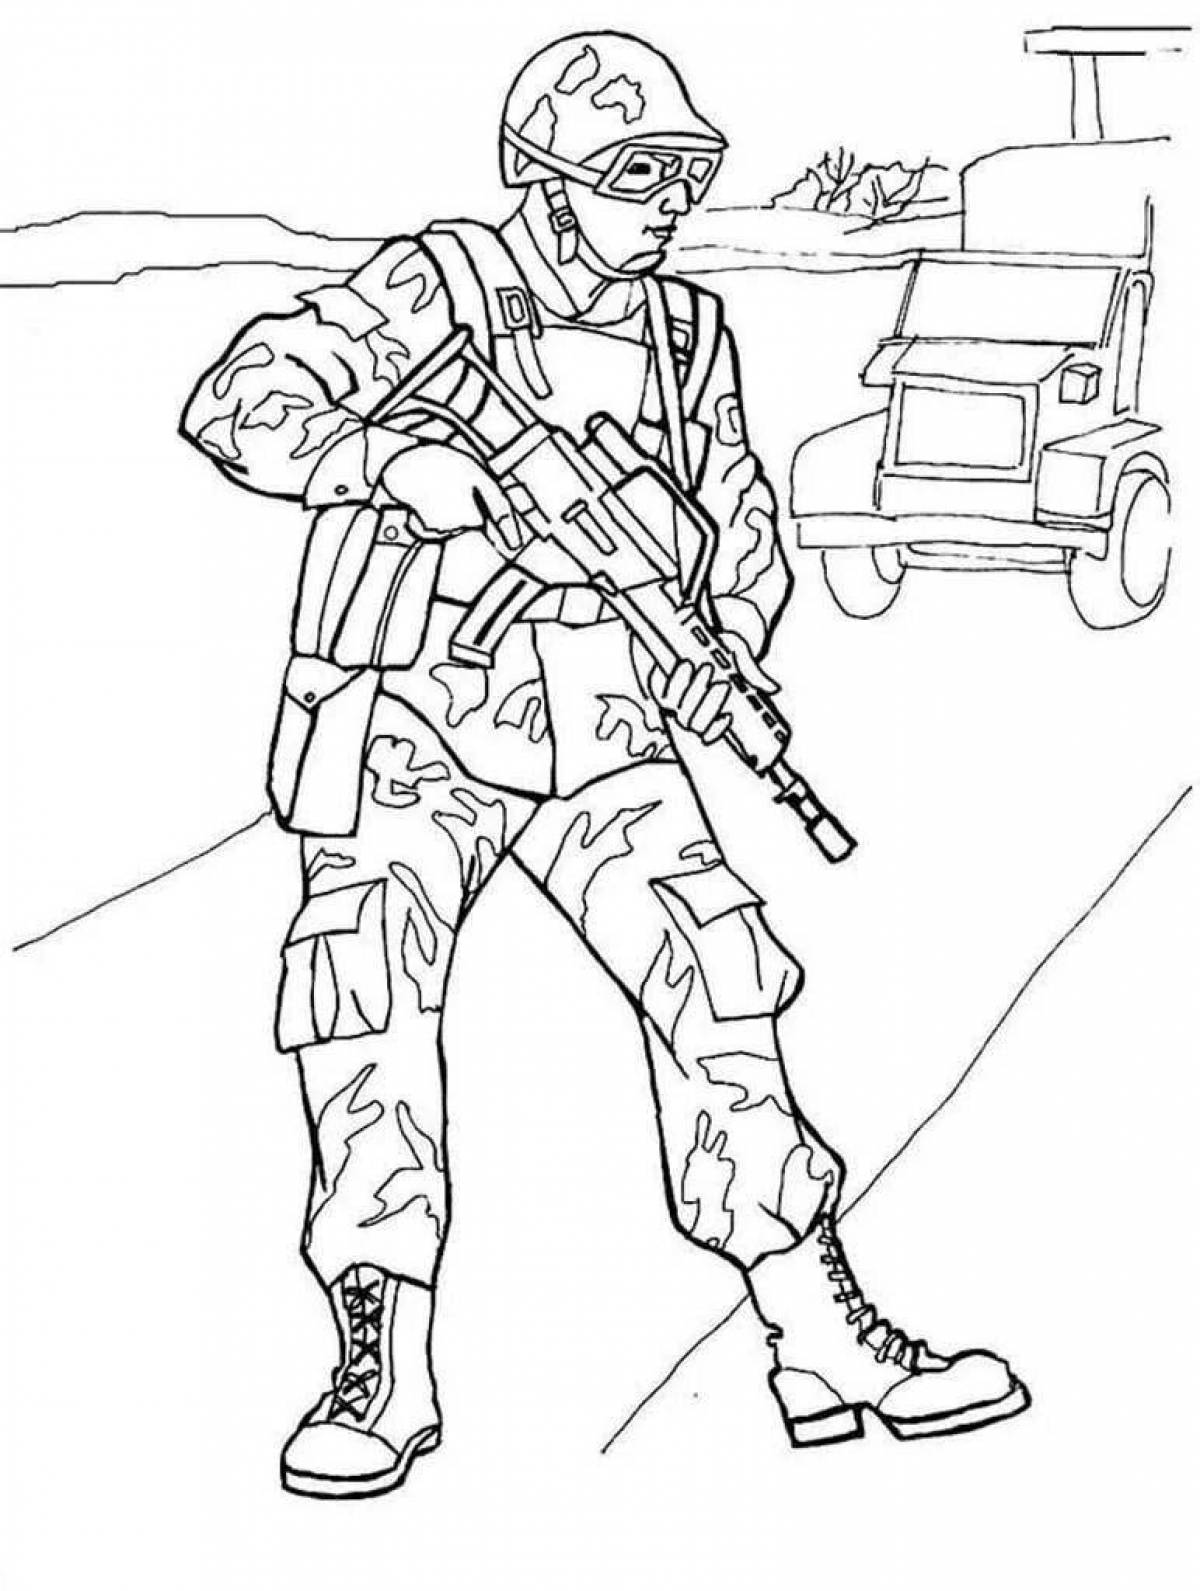 Modern soldier coloring book for kids